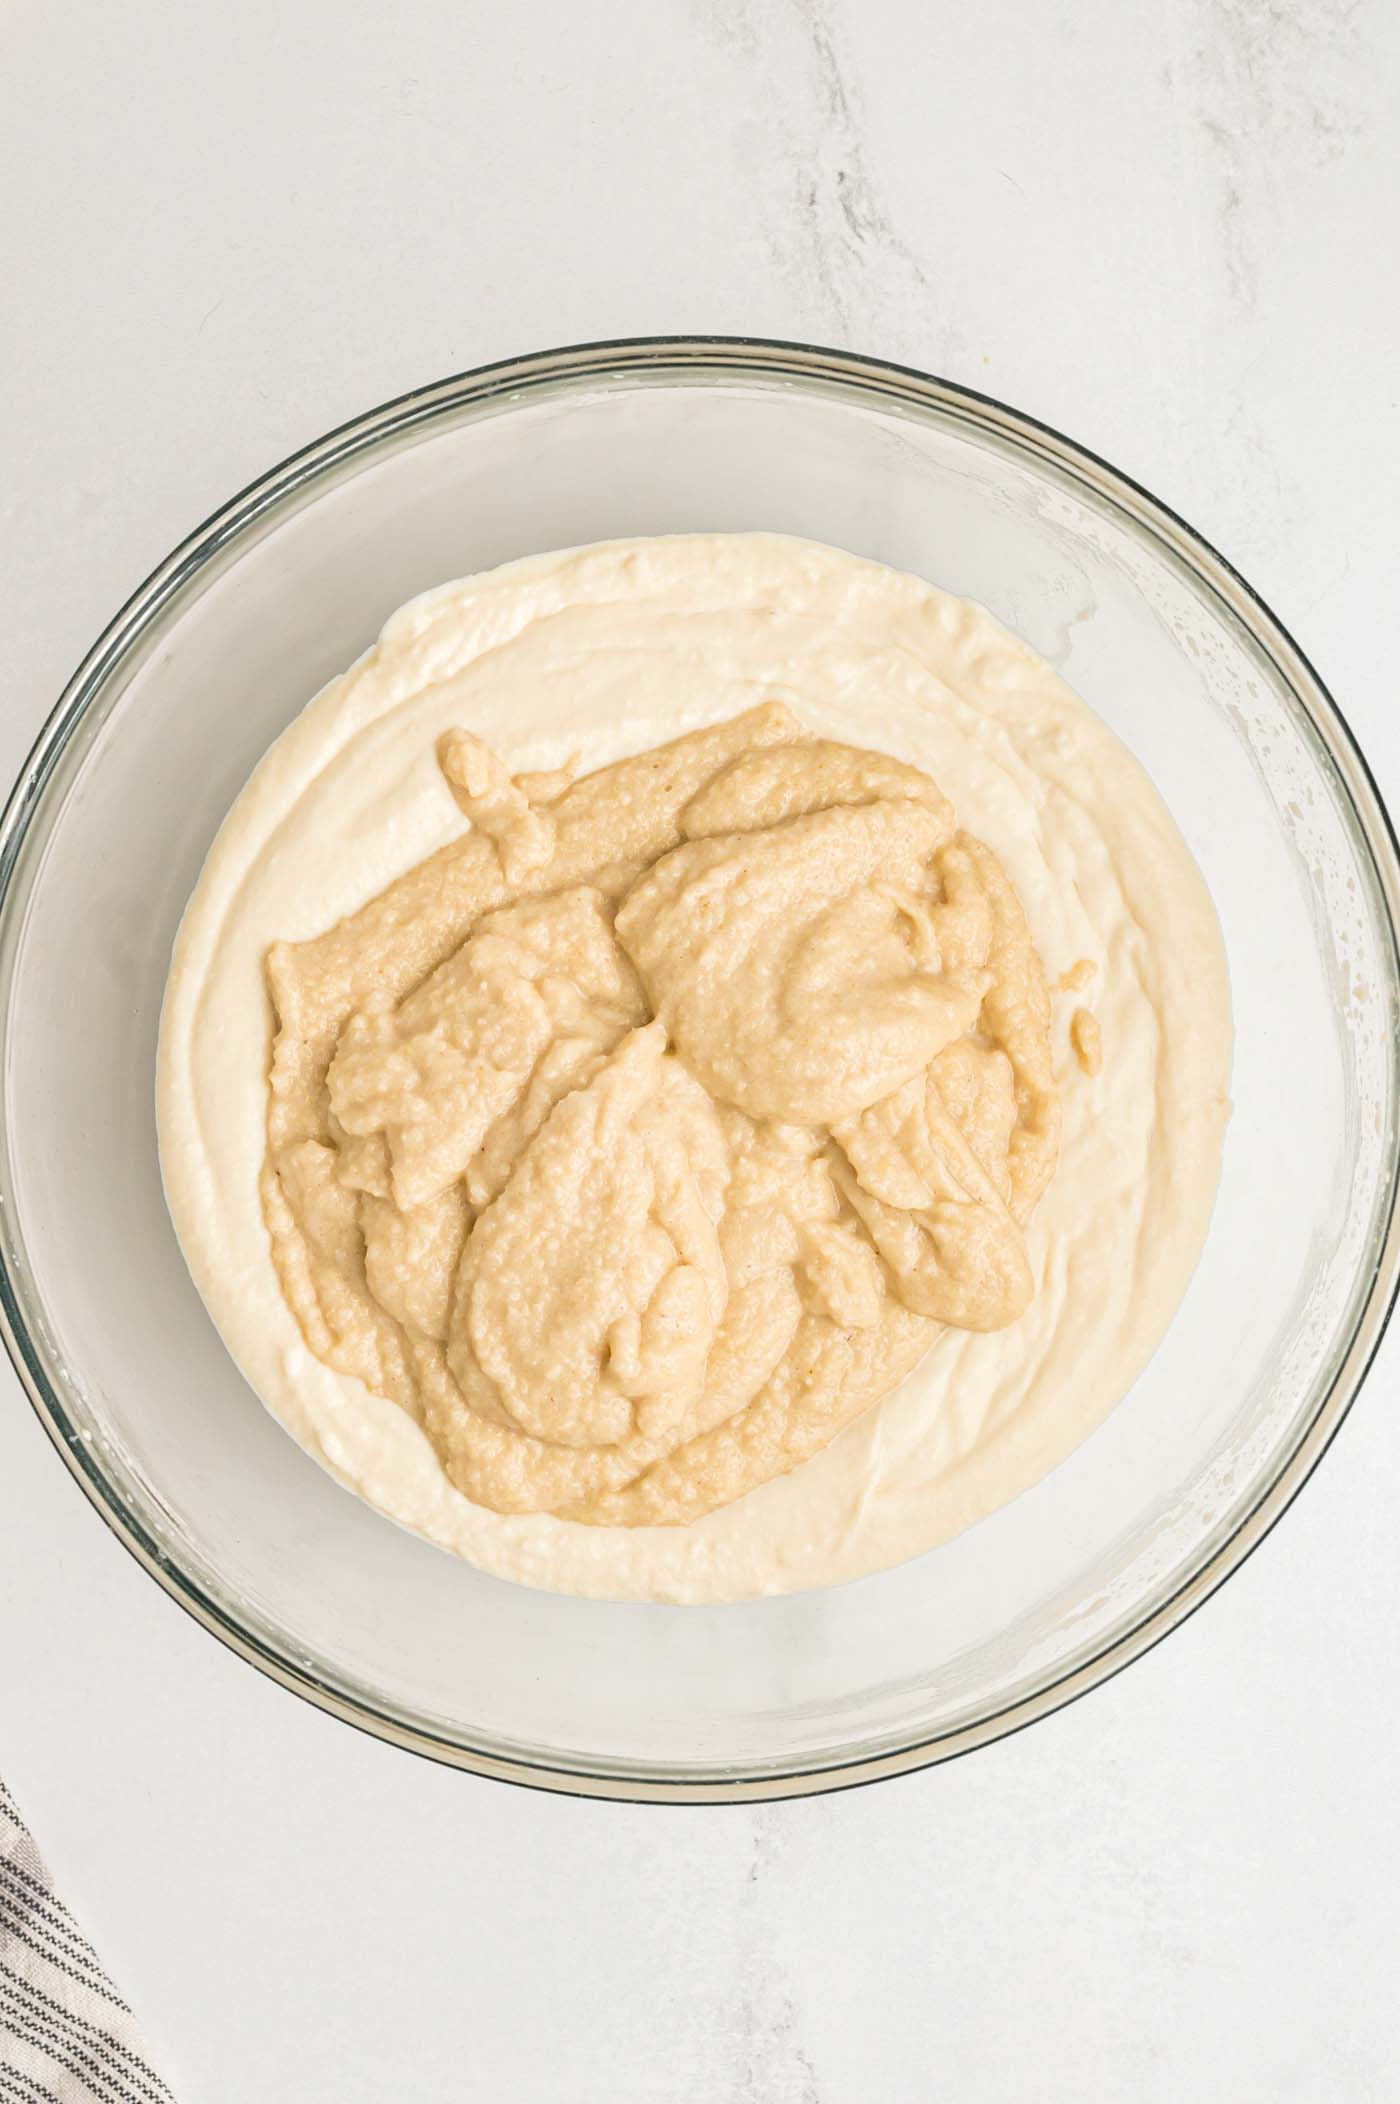 A creamy blended cashew mixture poured over a cream cheese-like mixture in a glass mixing bowl. Each cream is a slightly different shade of beige.